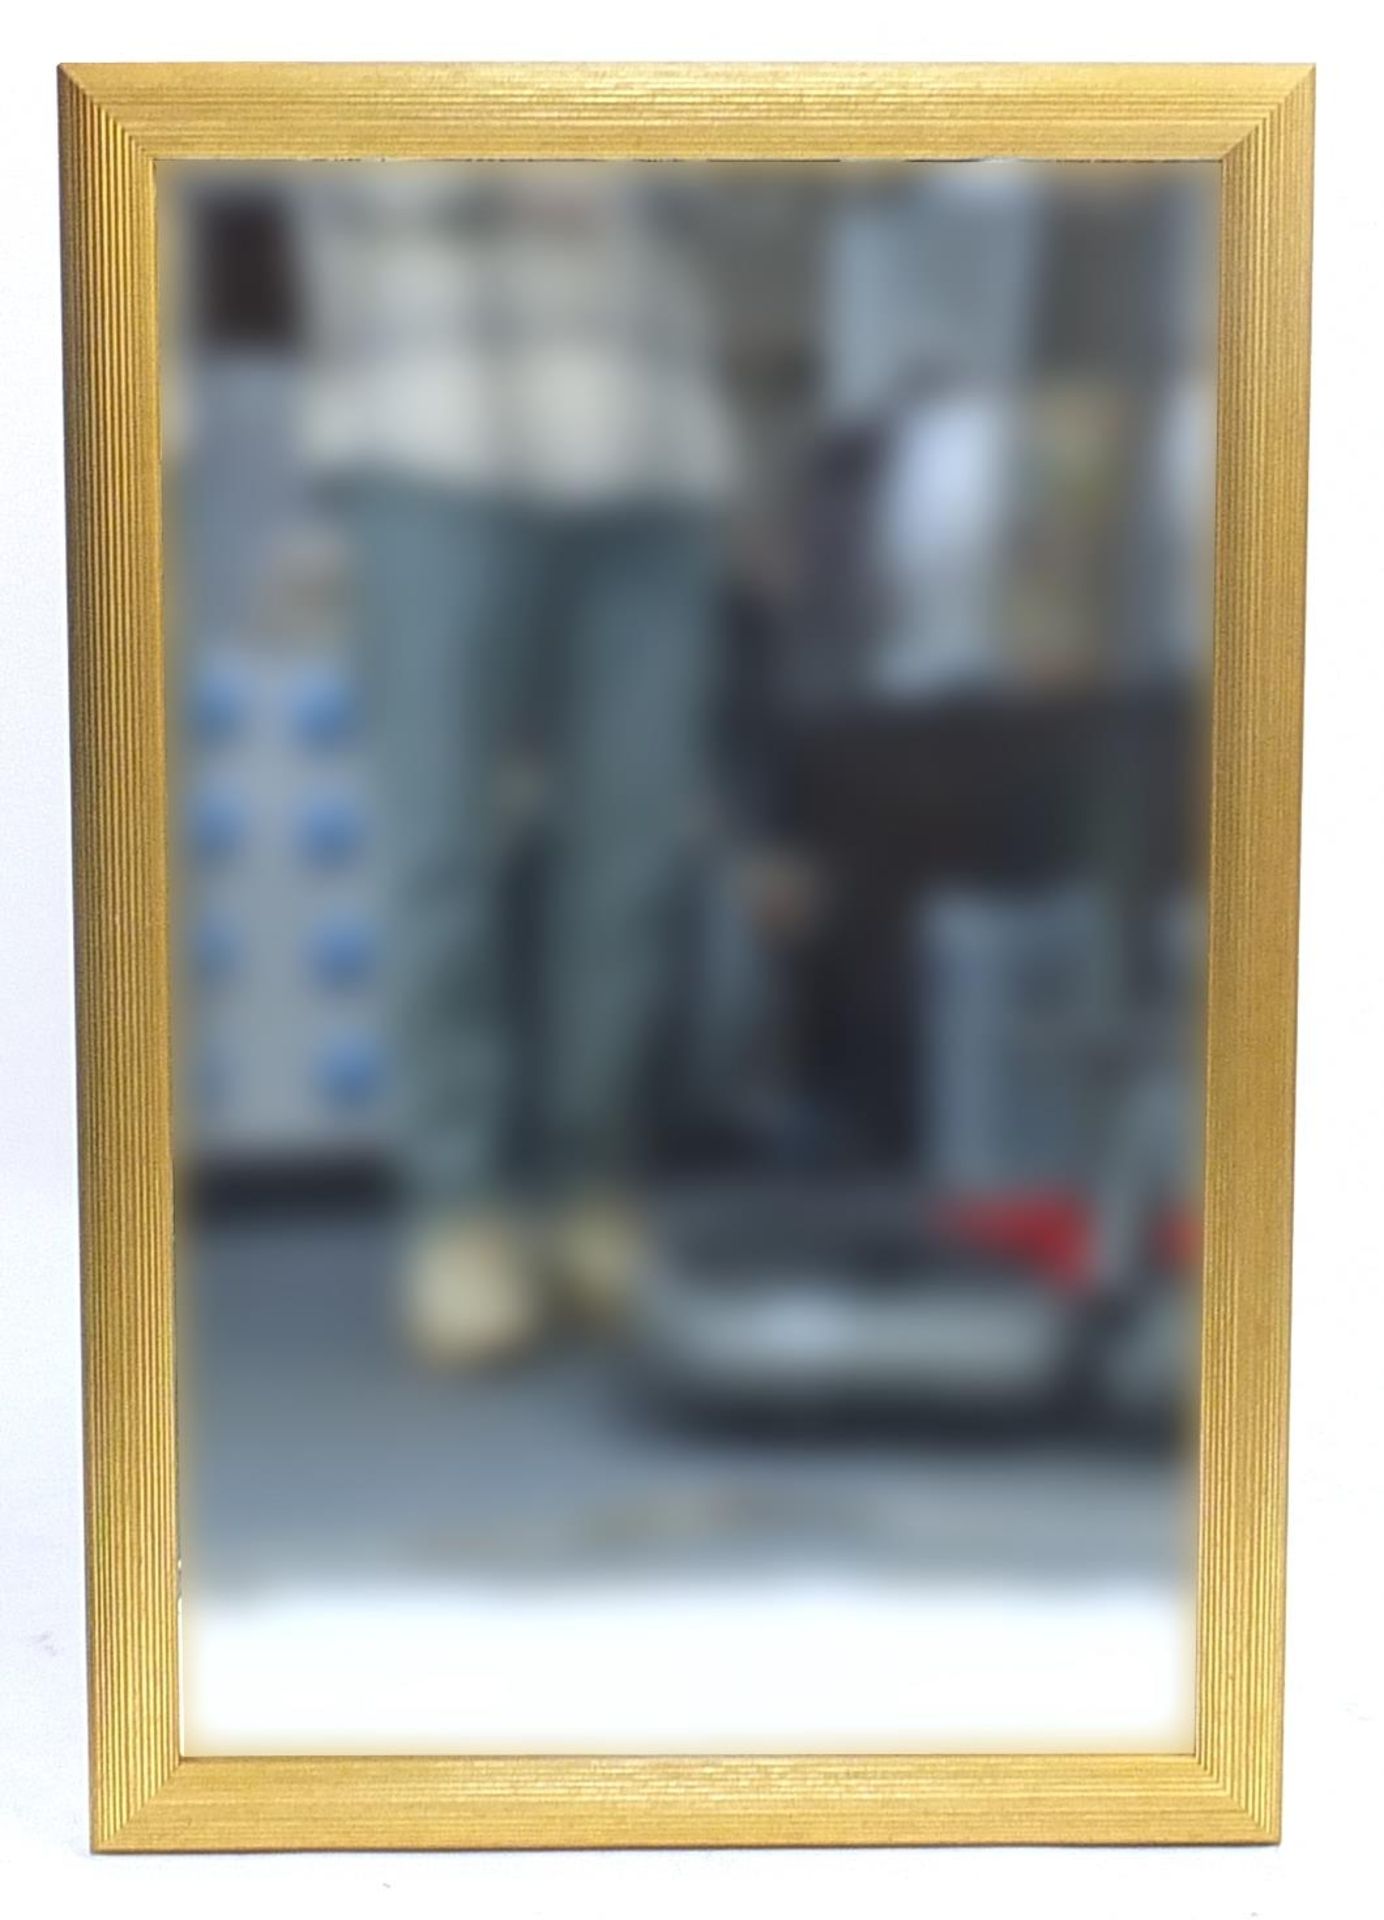 Rectangular gilt framed wall mirror with bevelled glass, 96cm x 64cm - Image 2 of 3